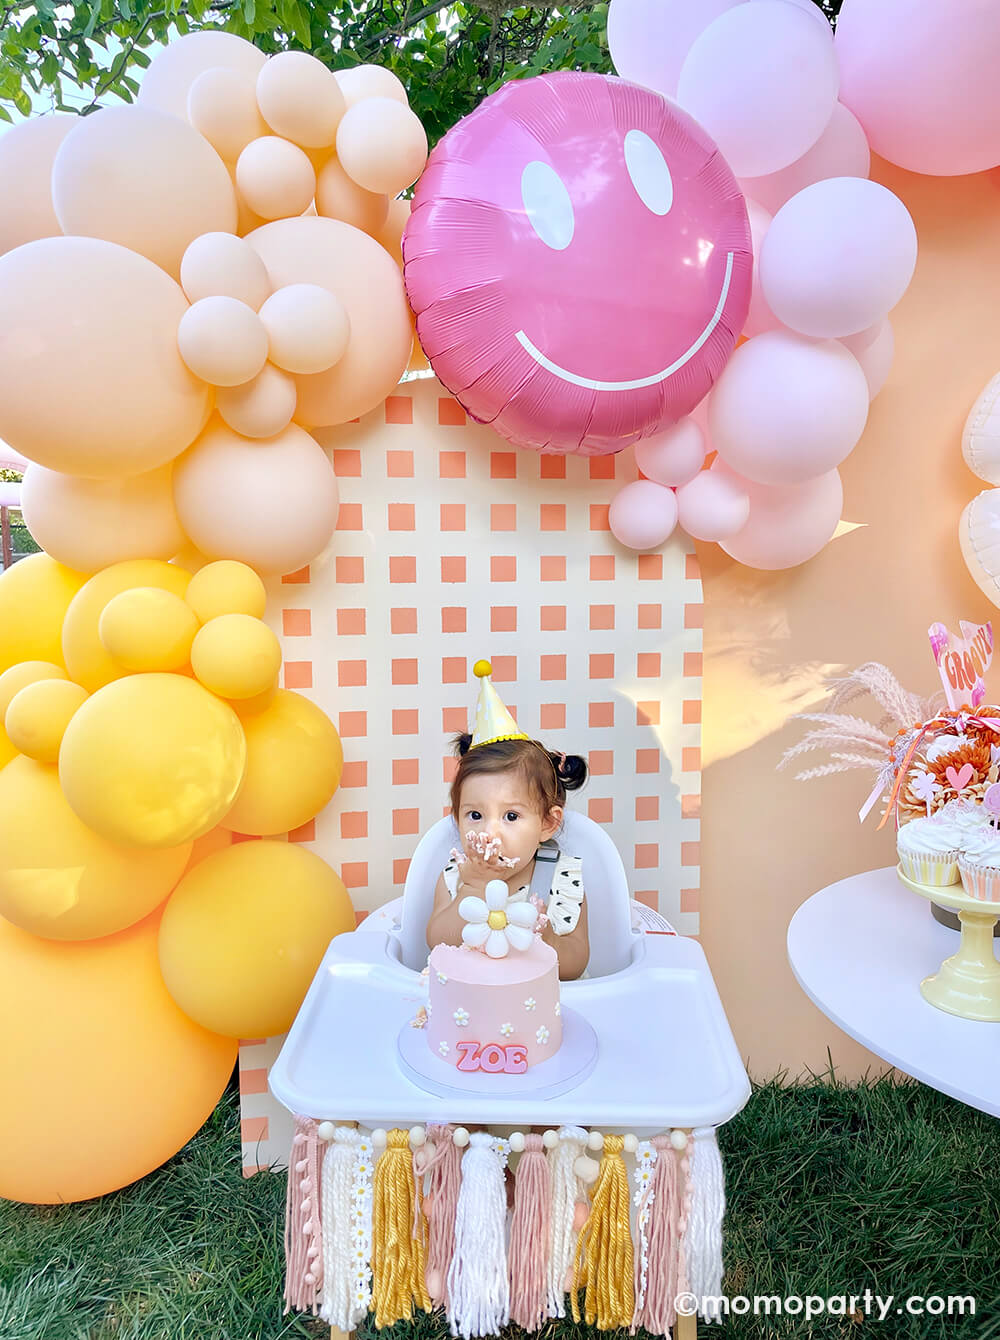 Momo Party One Groovy Baby First Birthday Party, with a birthday girl wearing a Retro Daisy Party Hat, sitting in the hair chair, eating her smash cake with a check patterned wooden Backdrop board, 30" Rosy Smiley face foil balloon by Tuftex Balloons, latex balloon decorations in peach, pink, Goldenrod colors. This decoration is such a stand-out backdrop and photo booth for a Groovy birthday party, baby showers, and almost any other joyful event